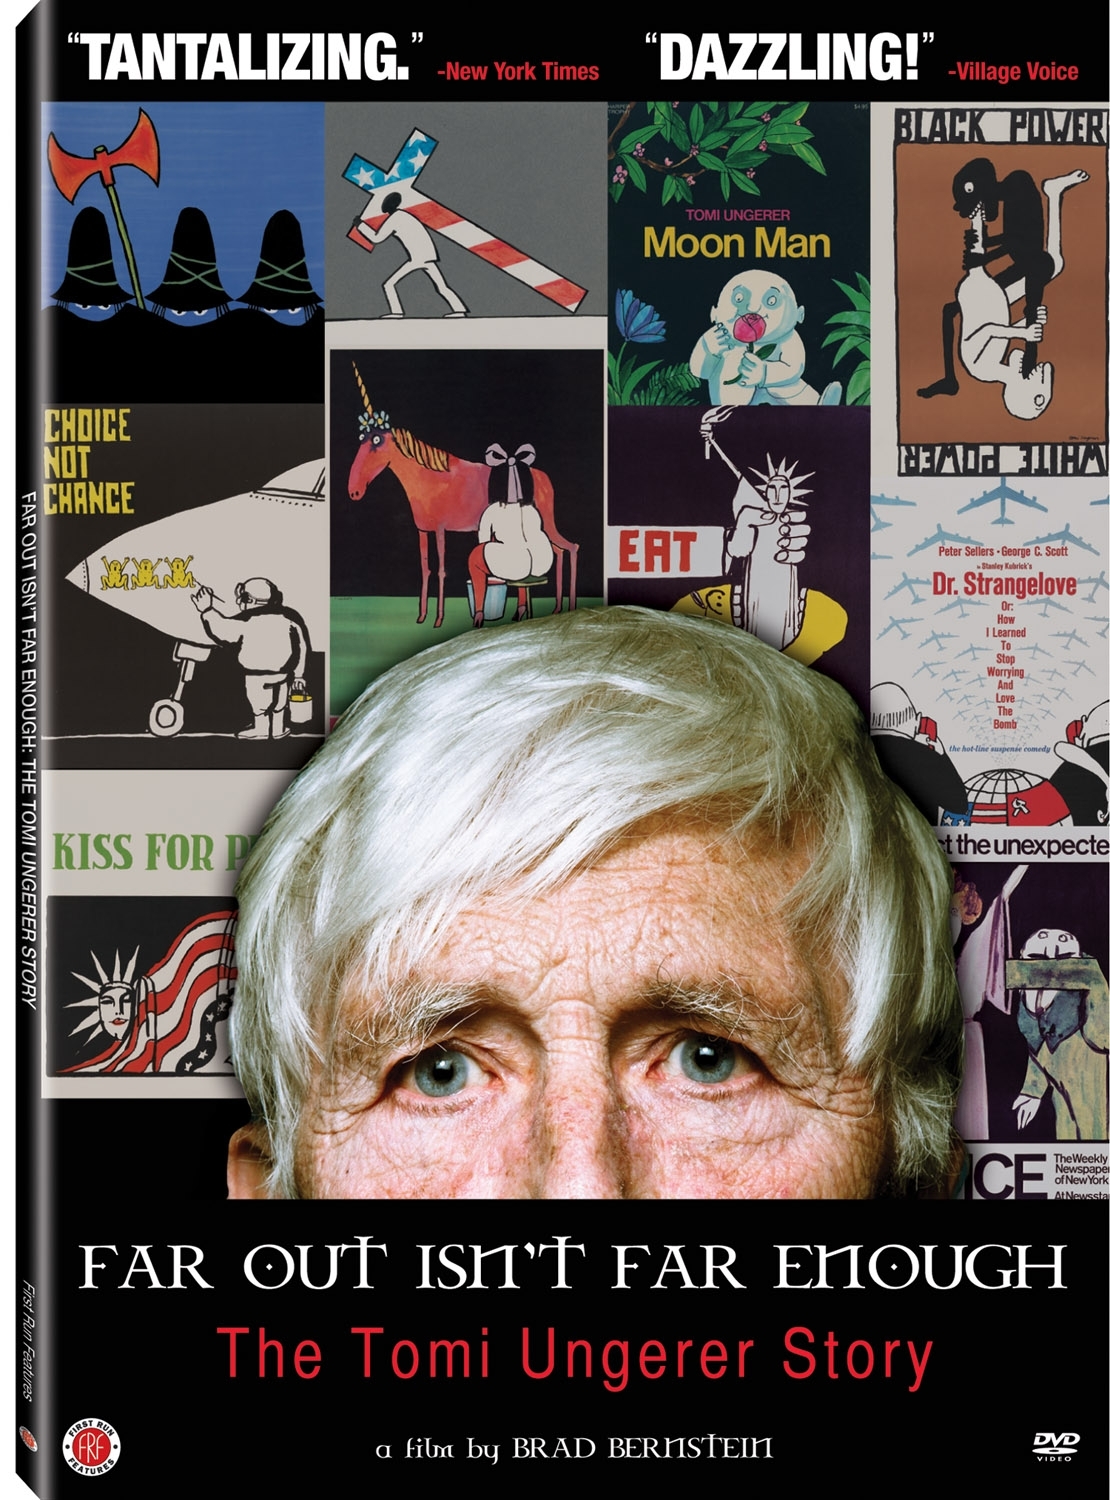 FAR OUT ISNT FAR ENOUGH: TOMI UNGERER STORY